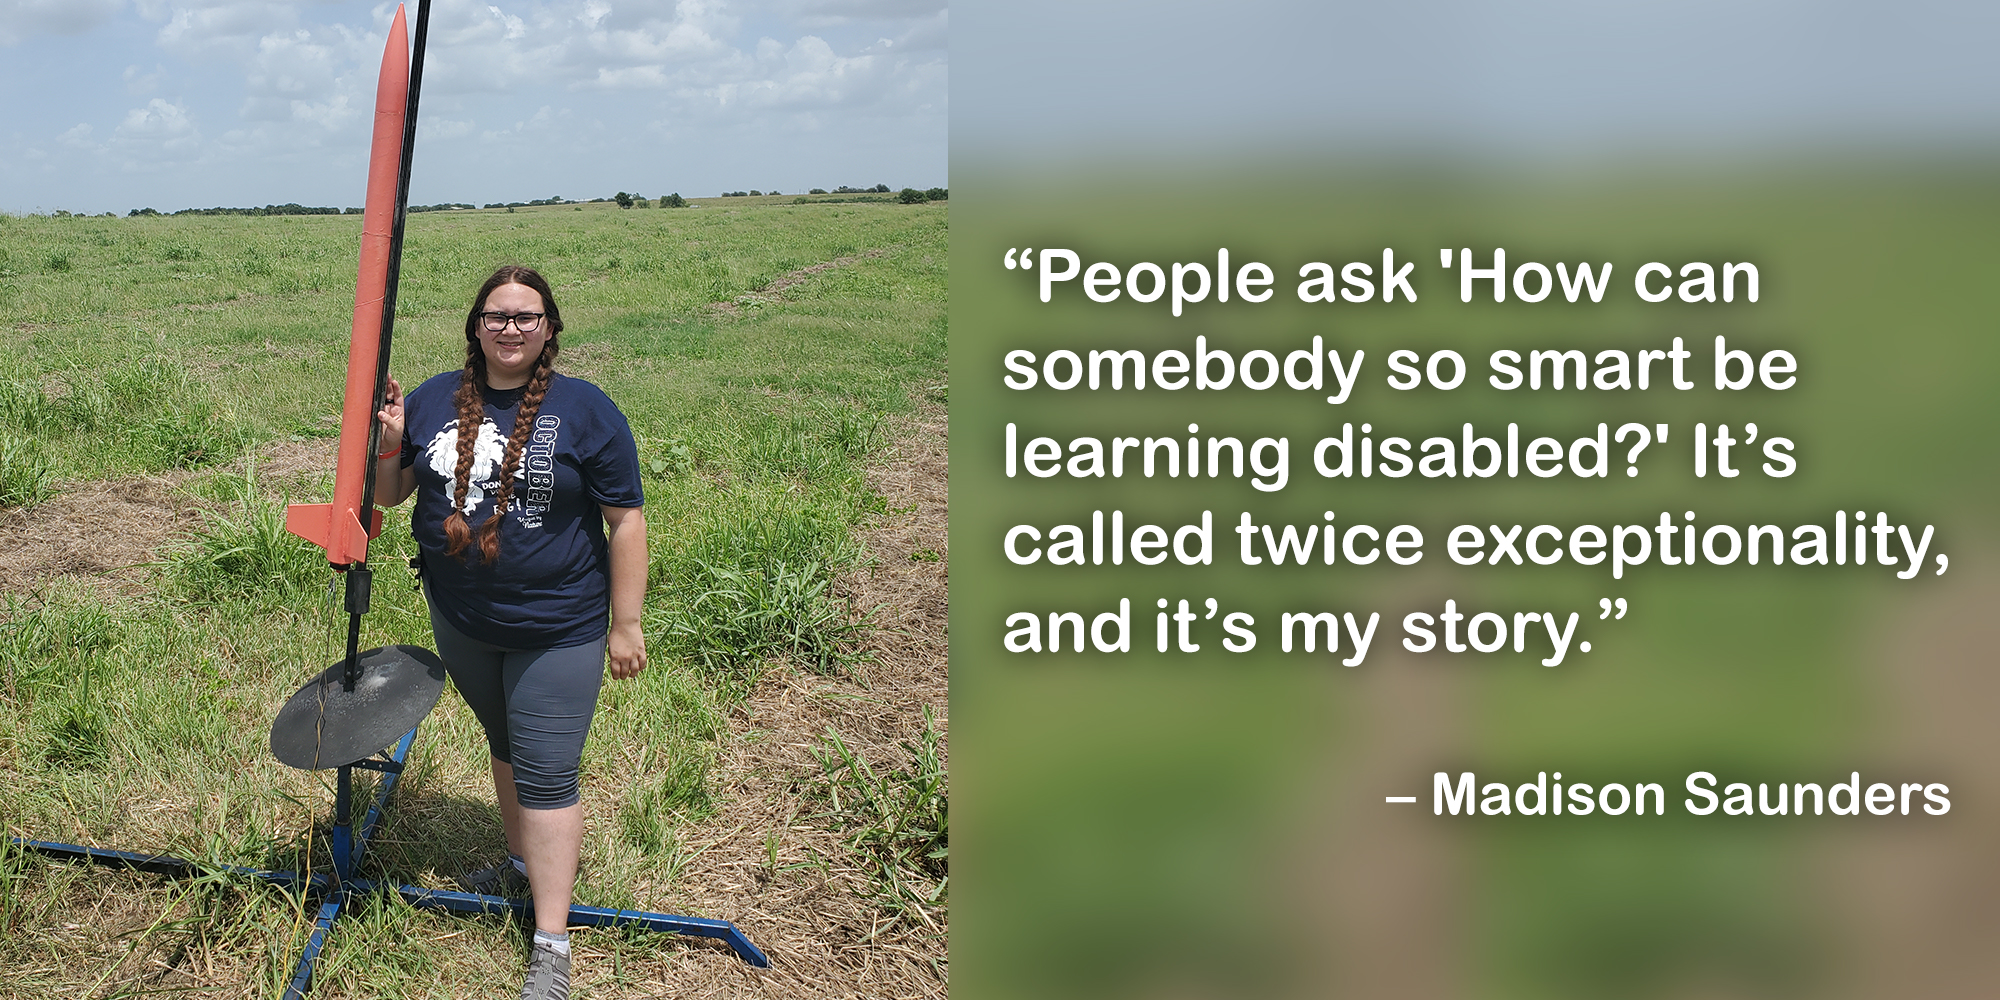 Madison is standing next to a rocket in a field with this quote: "People ask 'How can somebody so smart be learning disabled?' It's called twice exceptionality and it's my story."